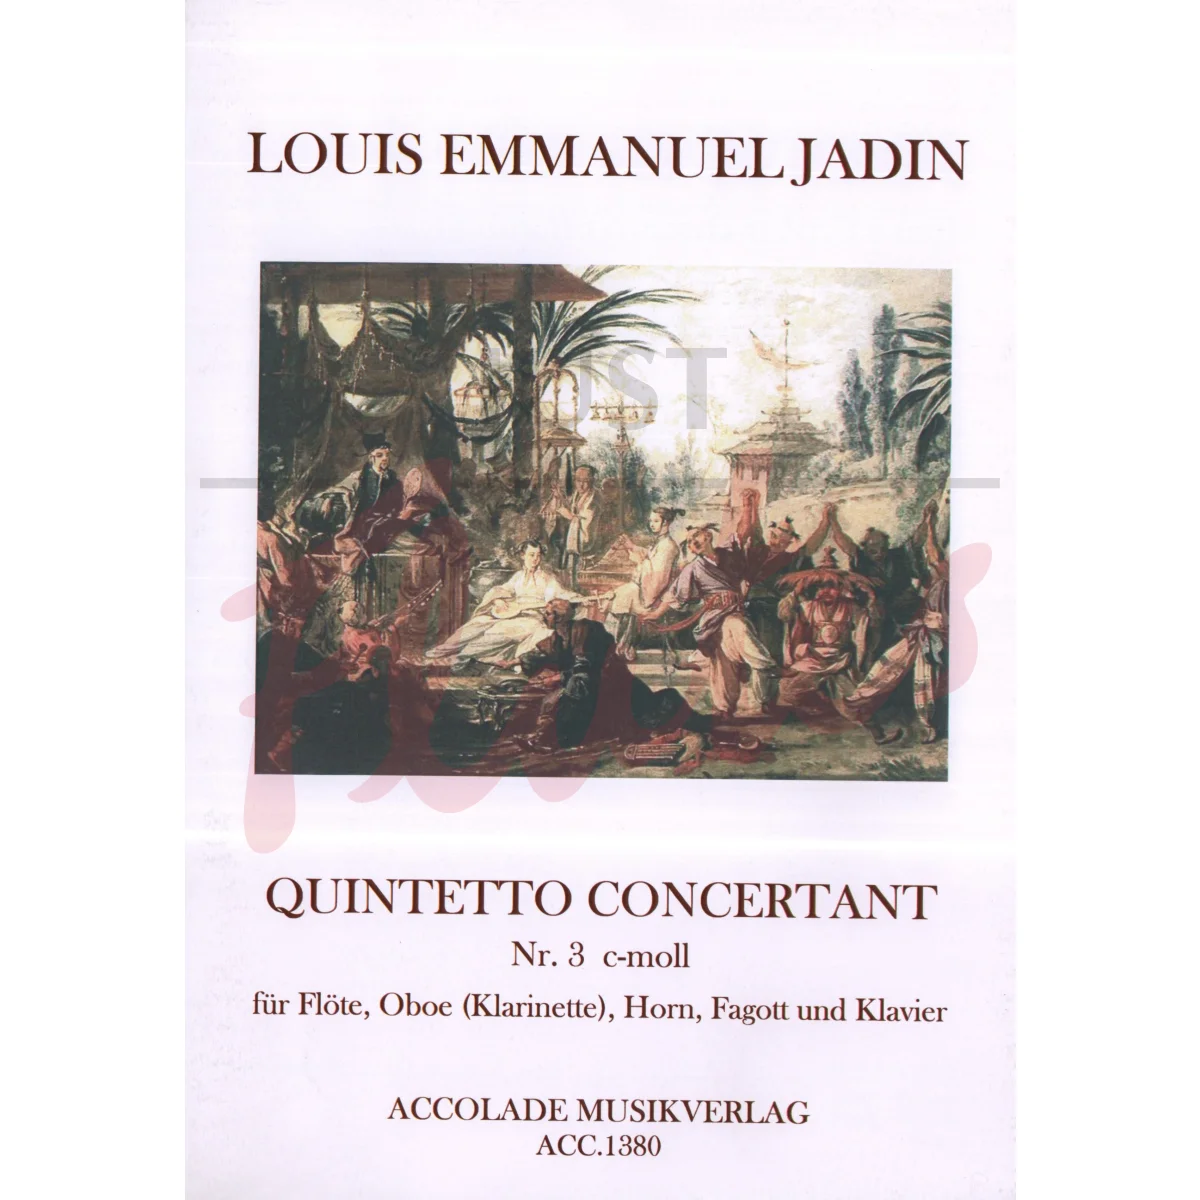 Quintetto Concertant No.3 in C minor for Flute, Oboe/Clarinet, Horn, Bassoon and Piano